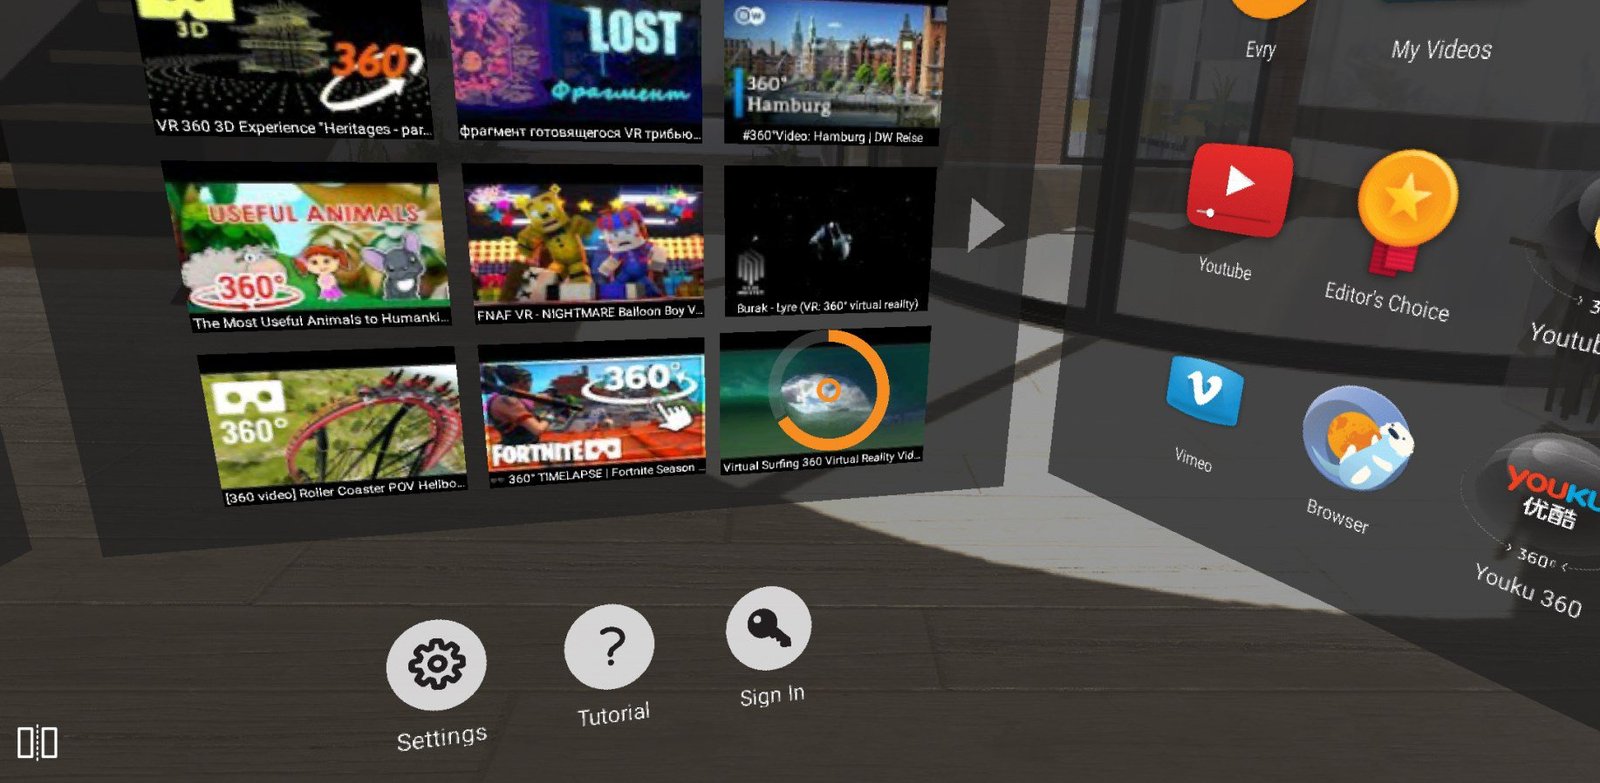 7 Best Virtual Reality Apps for Android - VR Apps 